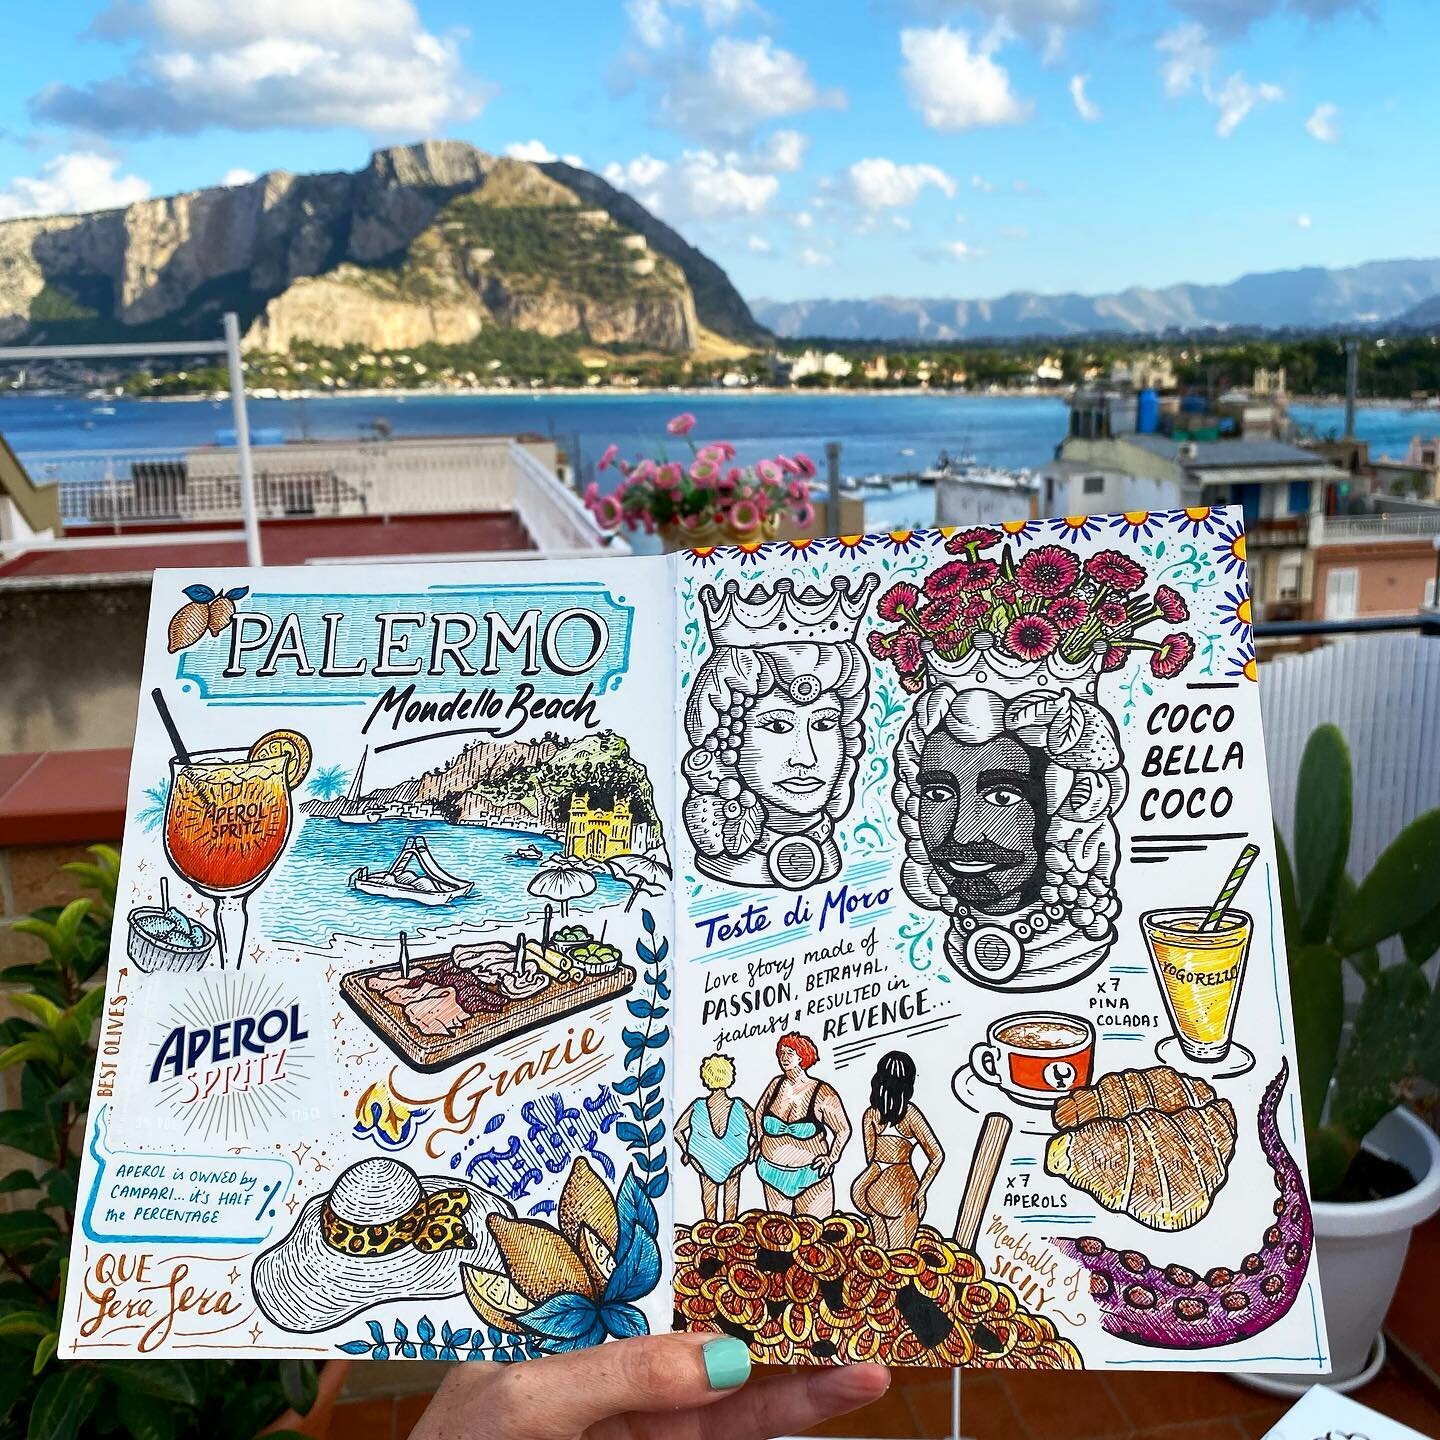 Hello Palermo and hello sketchbook - it&rsquo;s good to be back 🍋 a few beautiful days of exploring, pasta, aperol, pi&ntilde;a coladas and grilled octopus. Palermo and it&rsquo;s people have many stories to tell.
&bull;
&bull;
&bull;
#illustration 